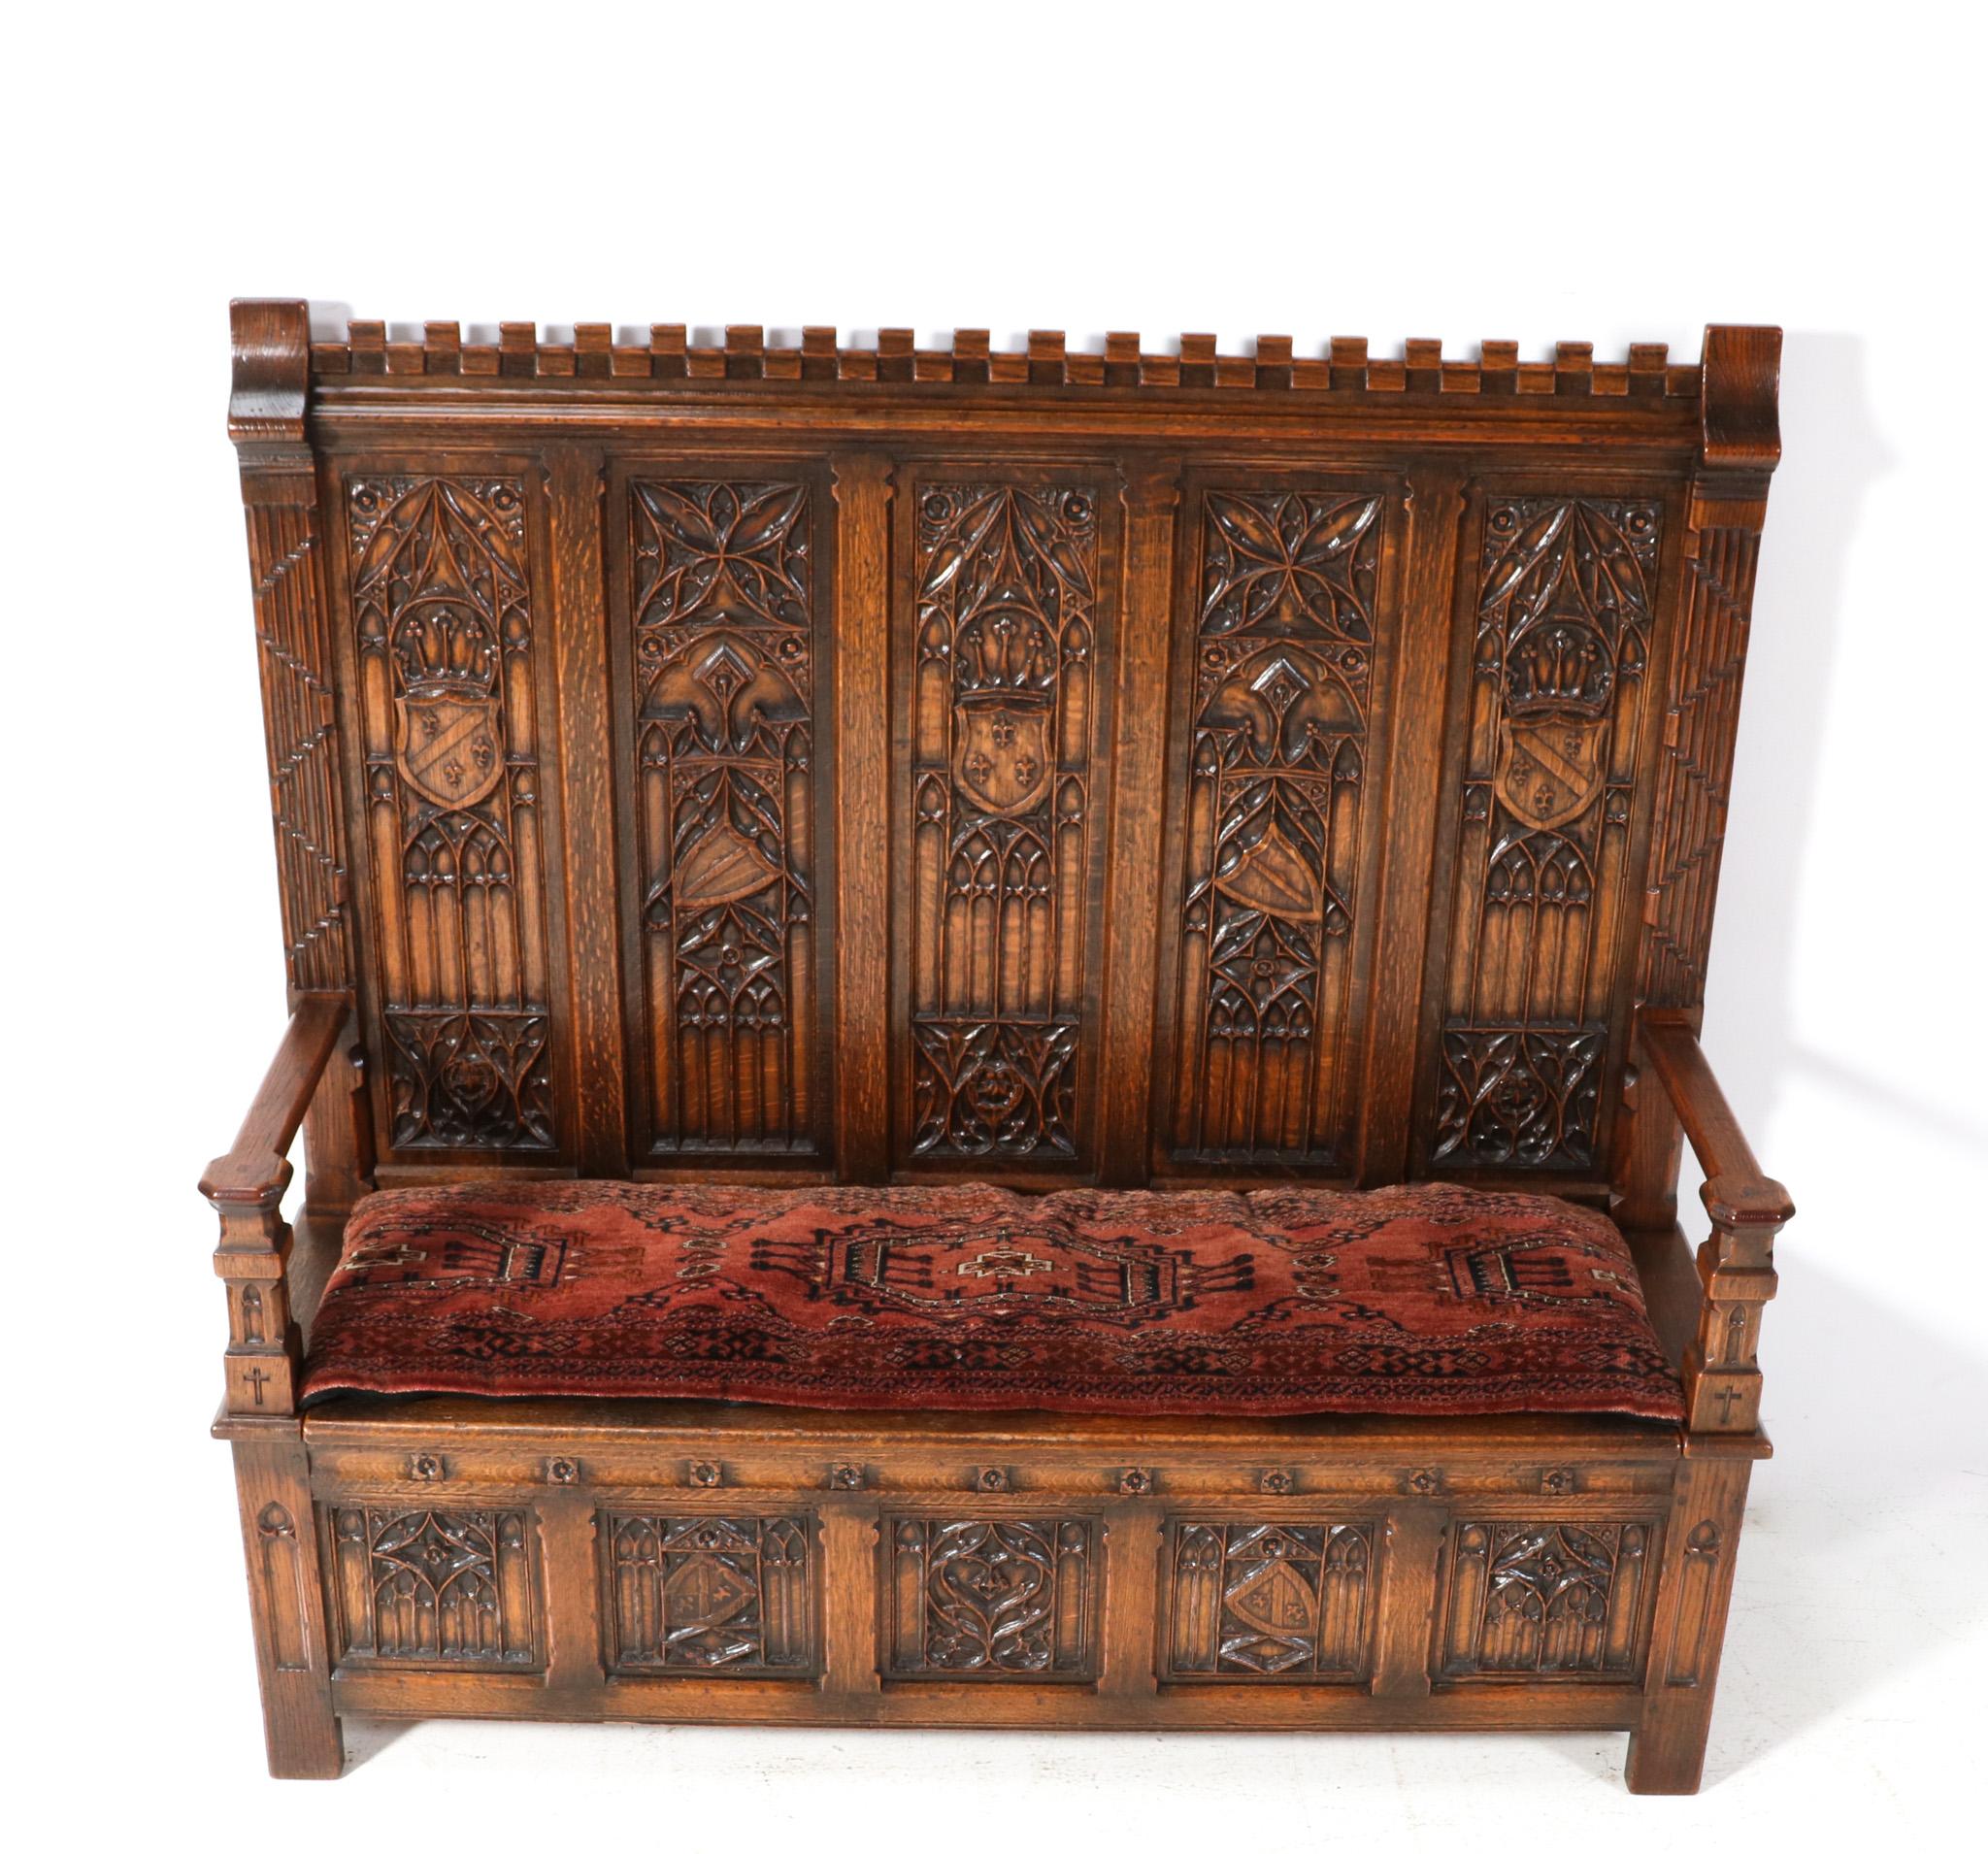  Gothic Revival Oak High Back Hall Bench, 1900s For Sale 2